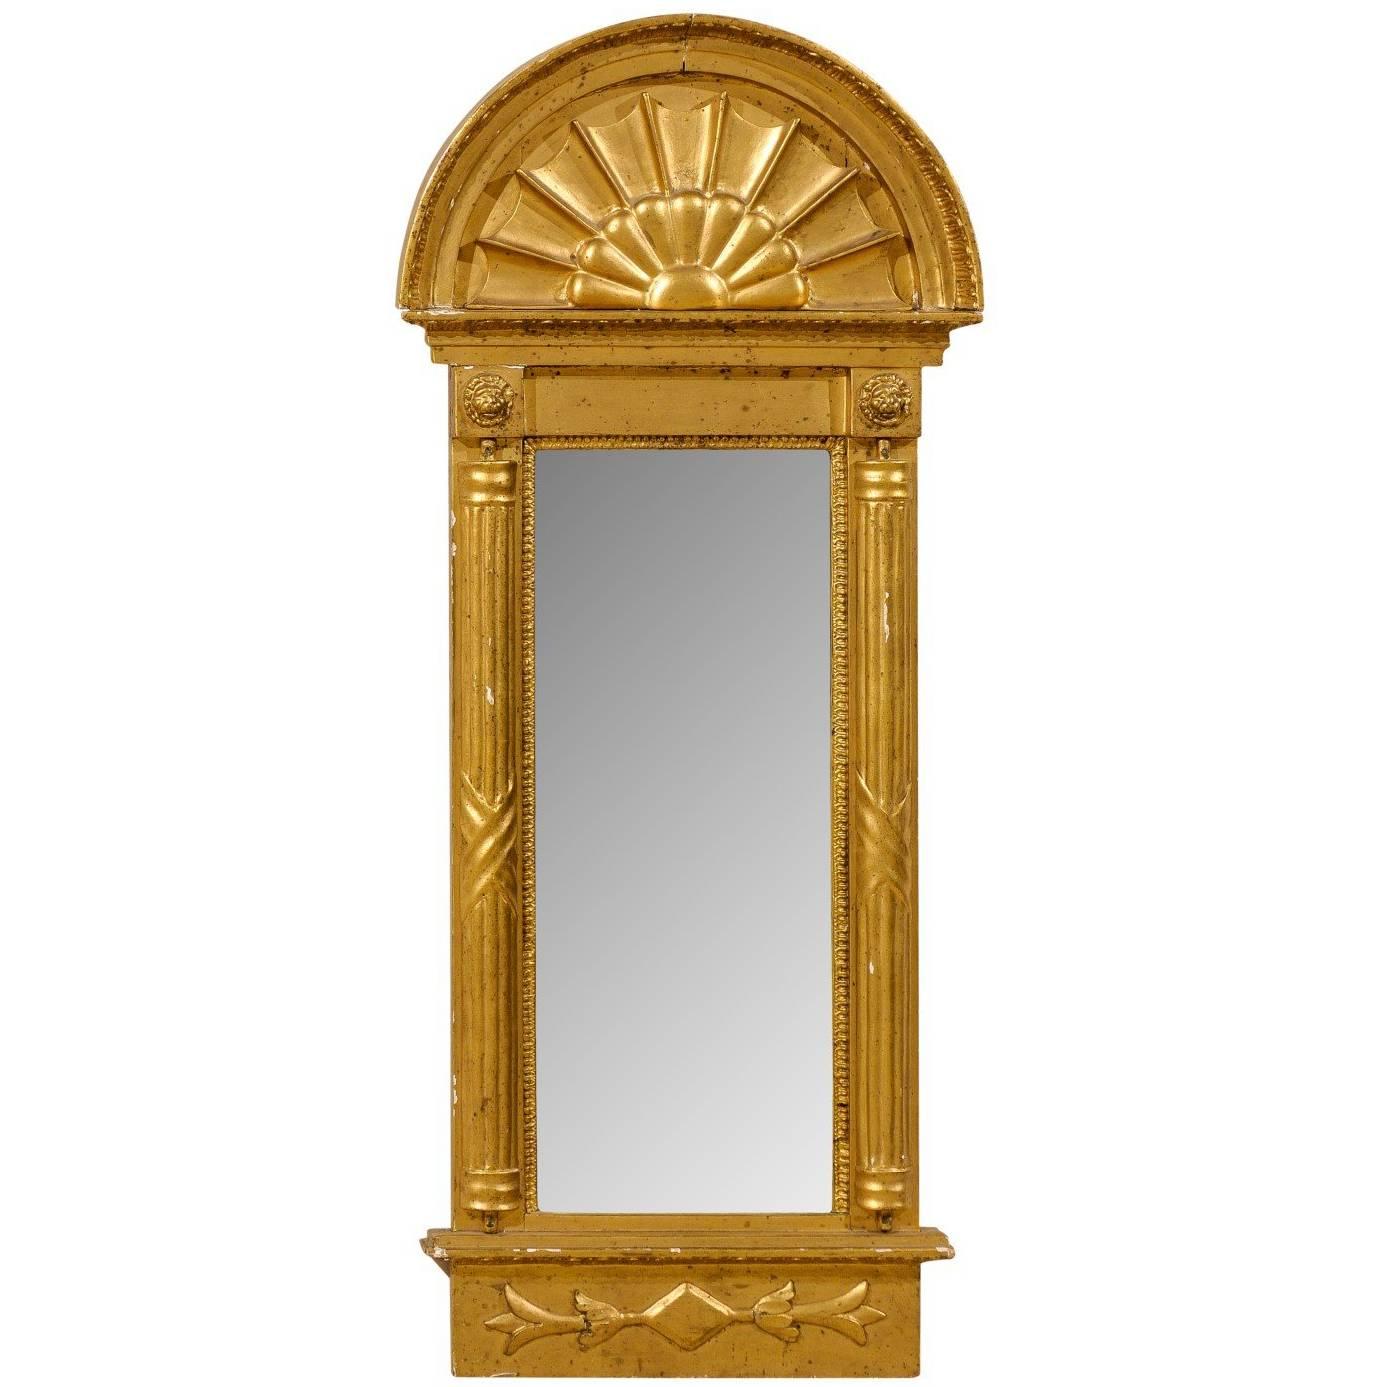 Swedish Gilded Mirror, circa 1820 with Arched Crest and Flanking Half Columns